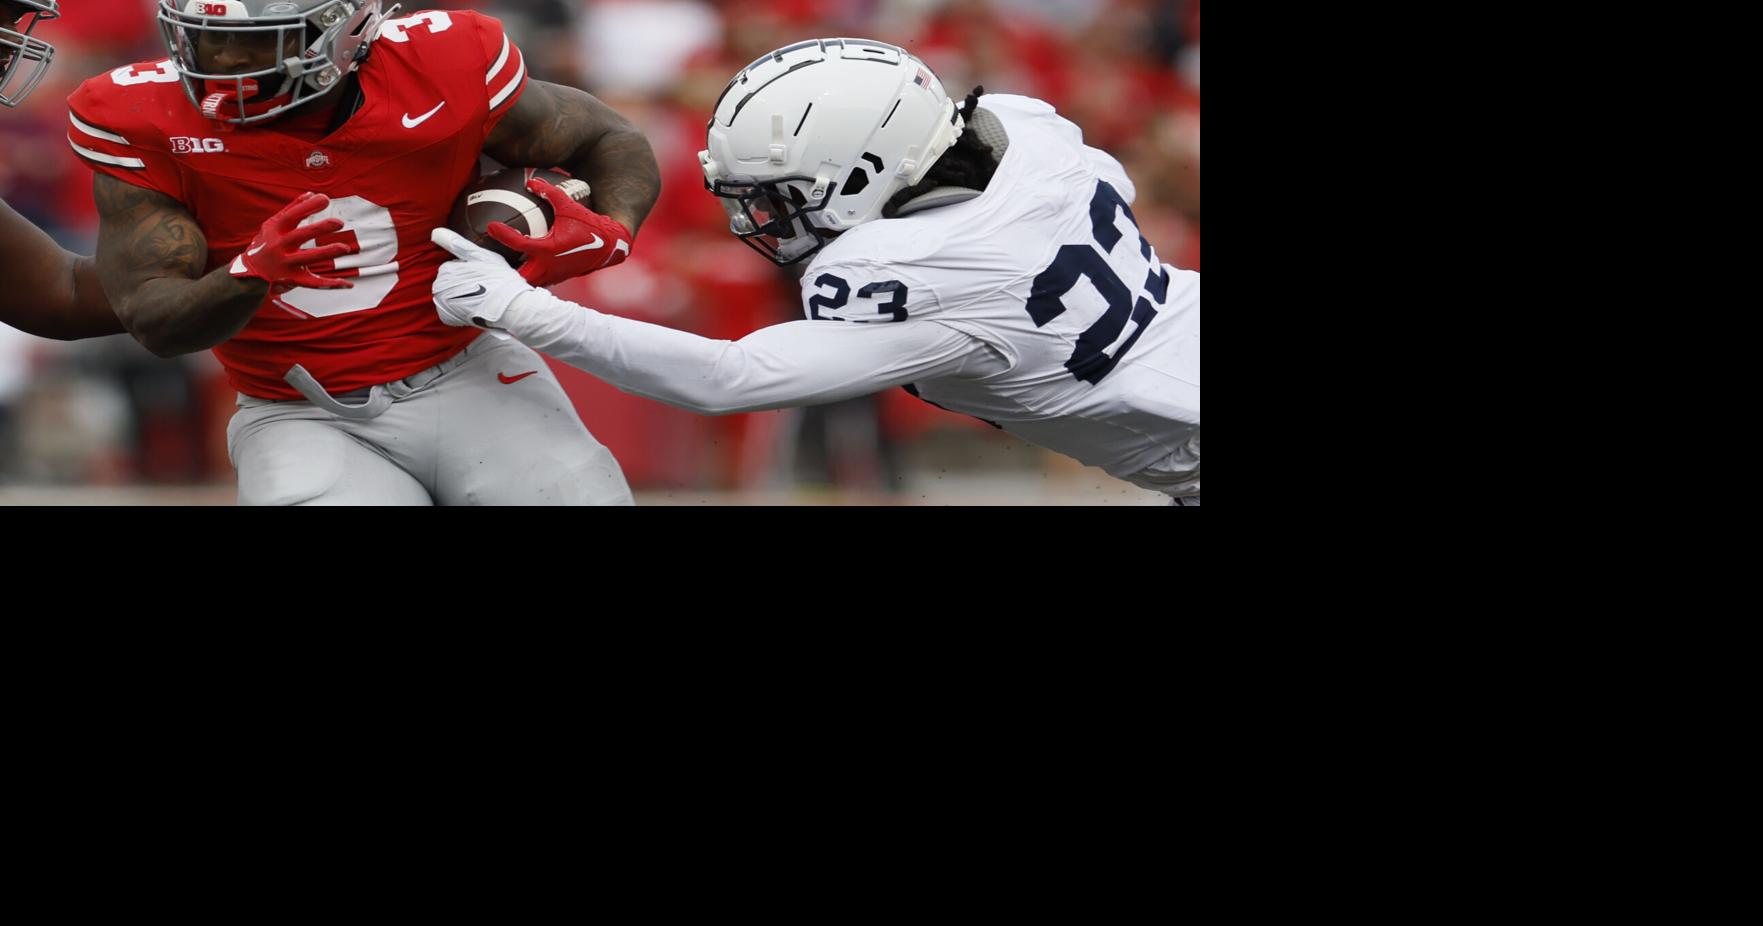 Penn State vs. Ohio State final score, results: Buckeyes remain unbeaten  with defensive win over Nittany Lions